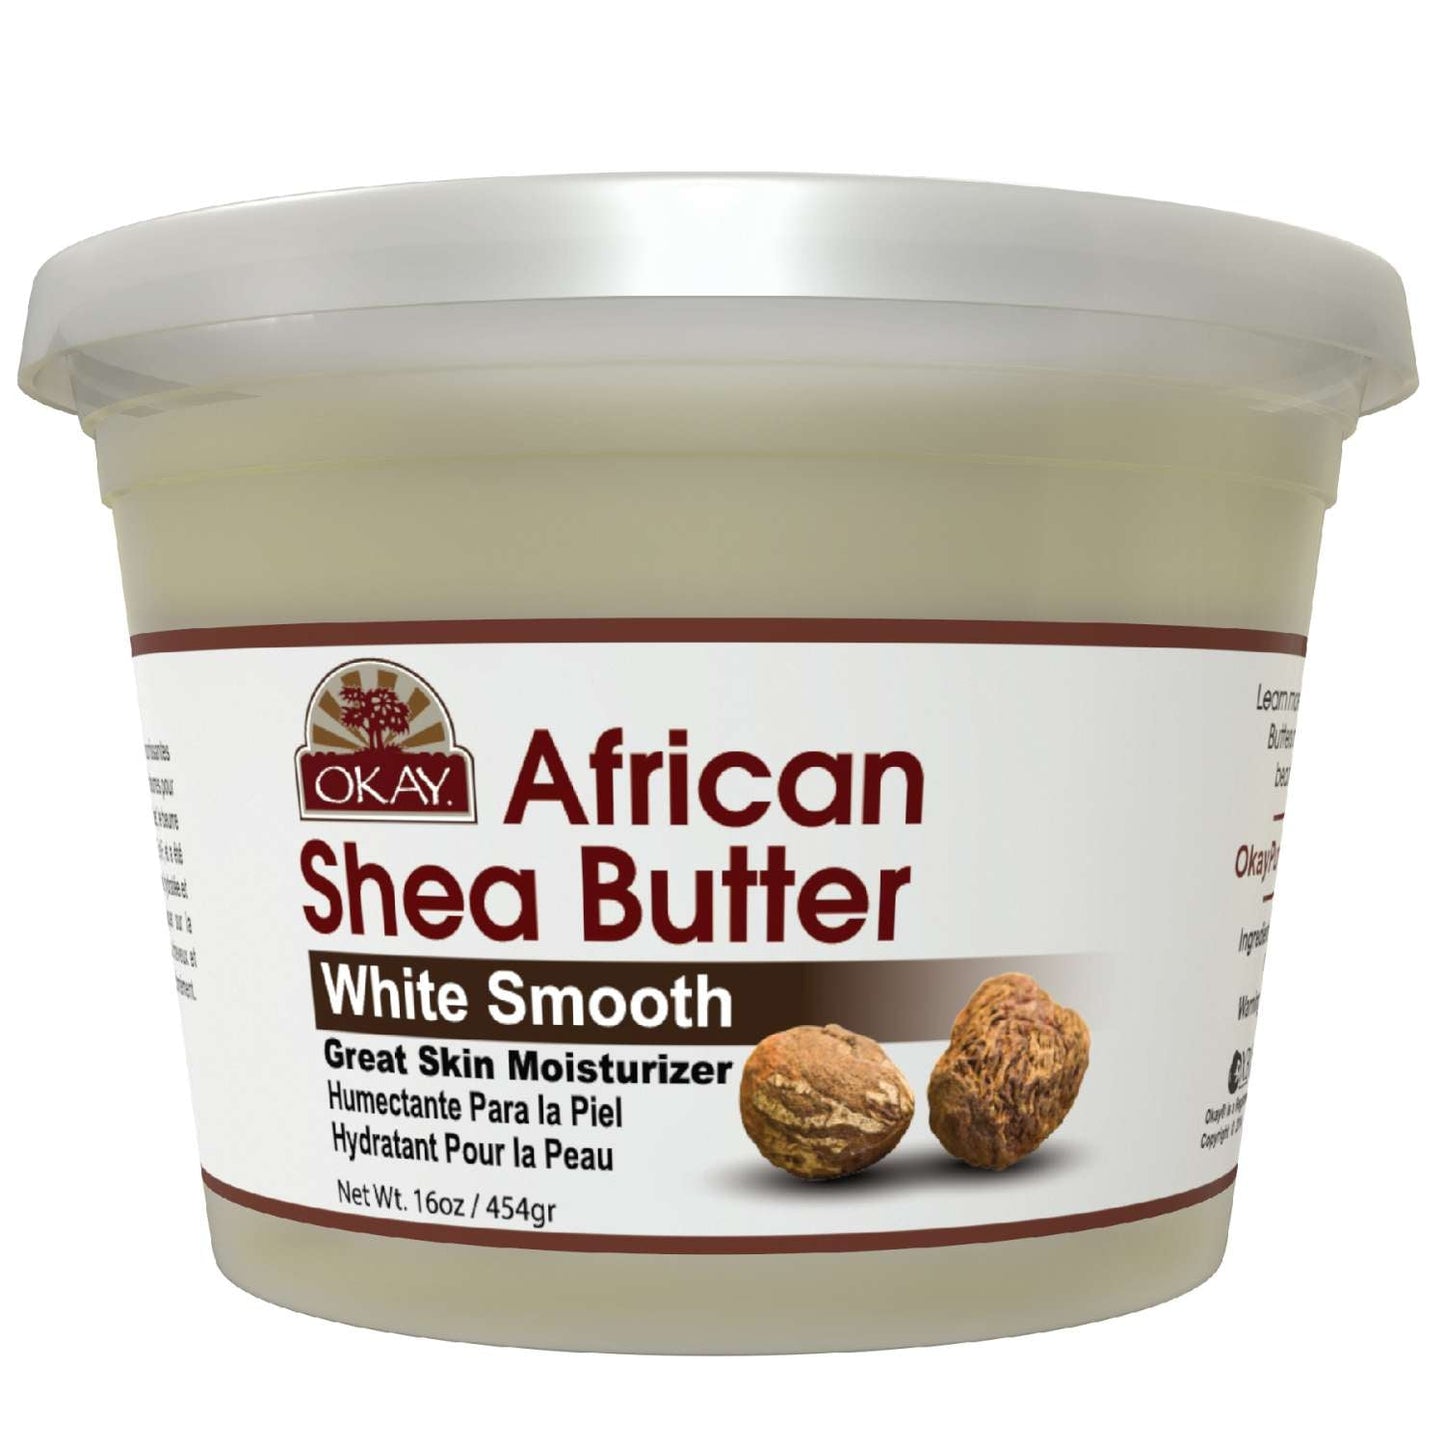 Okay Shea Butter White Solid